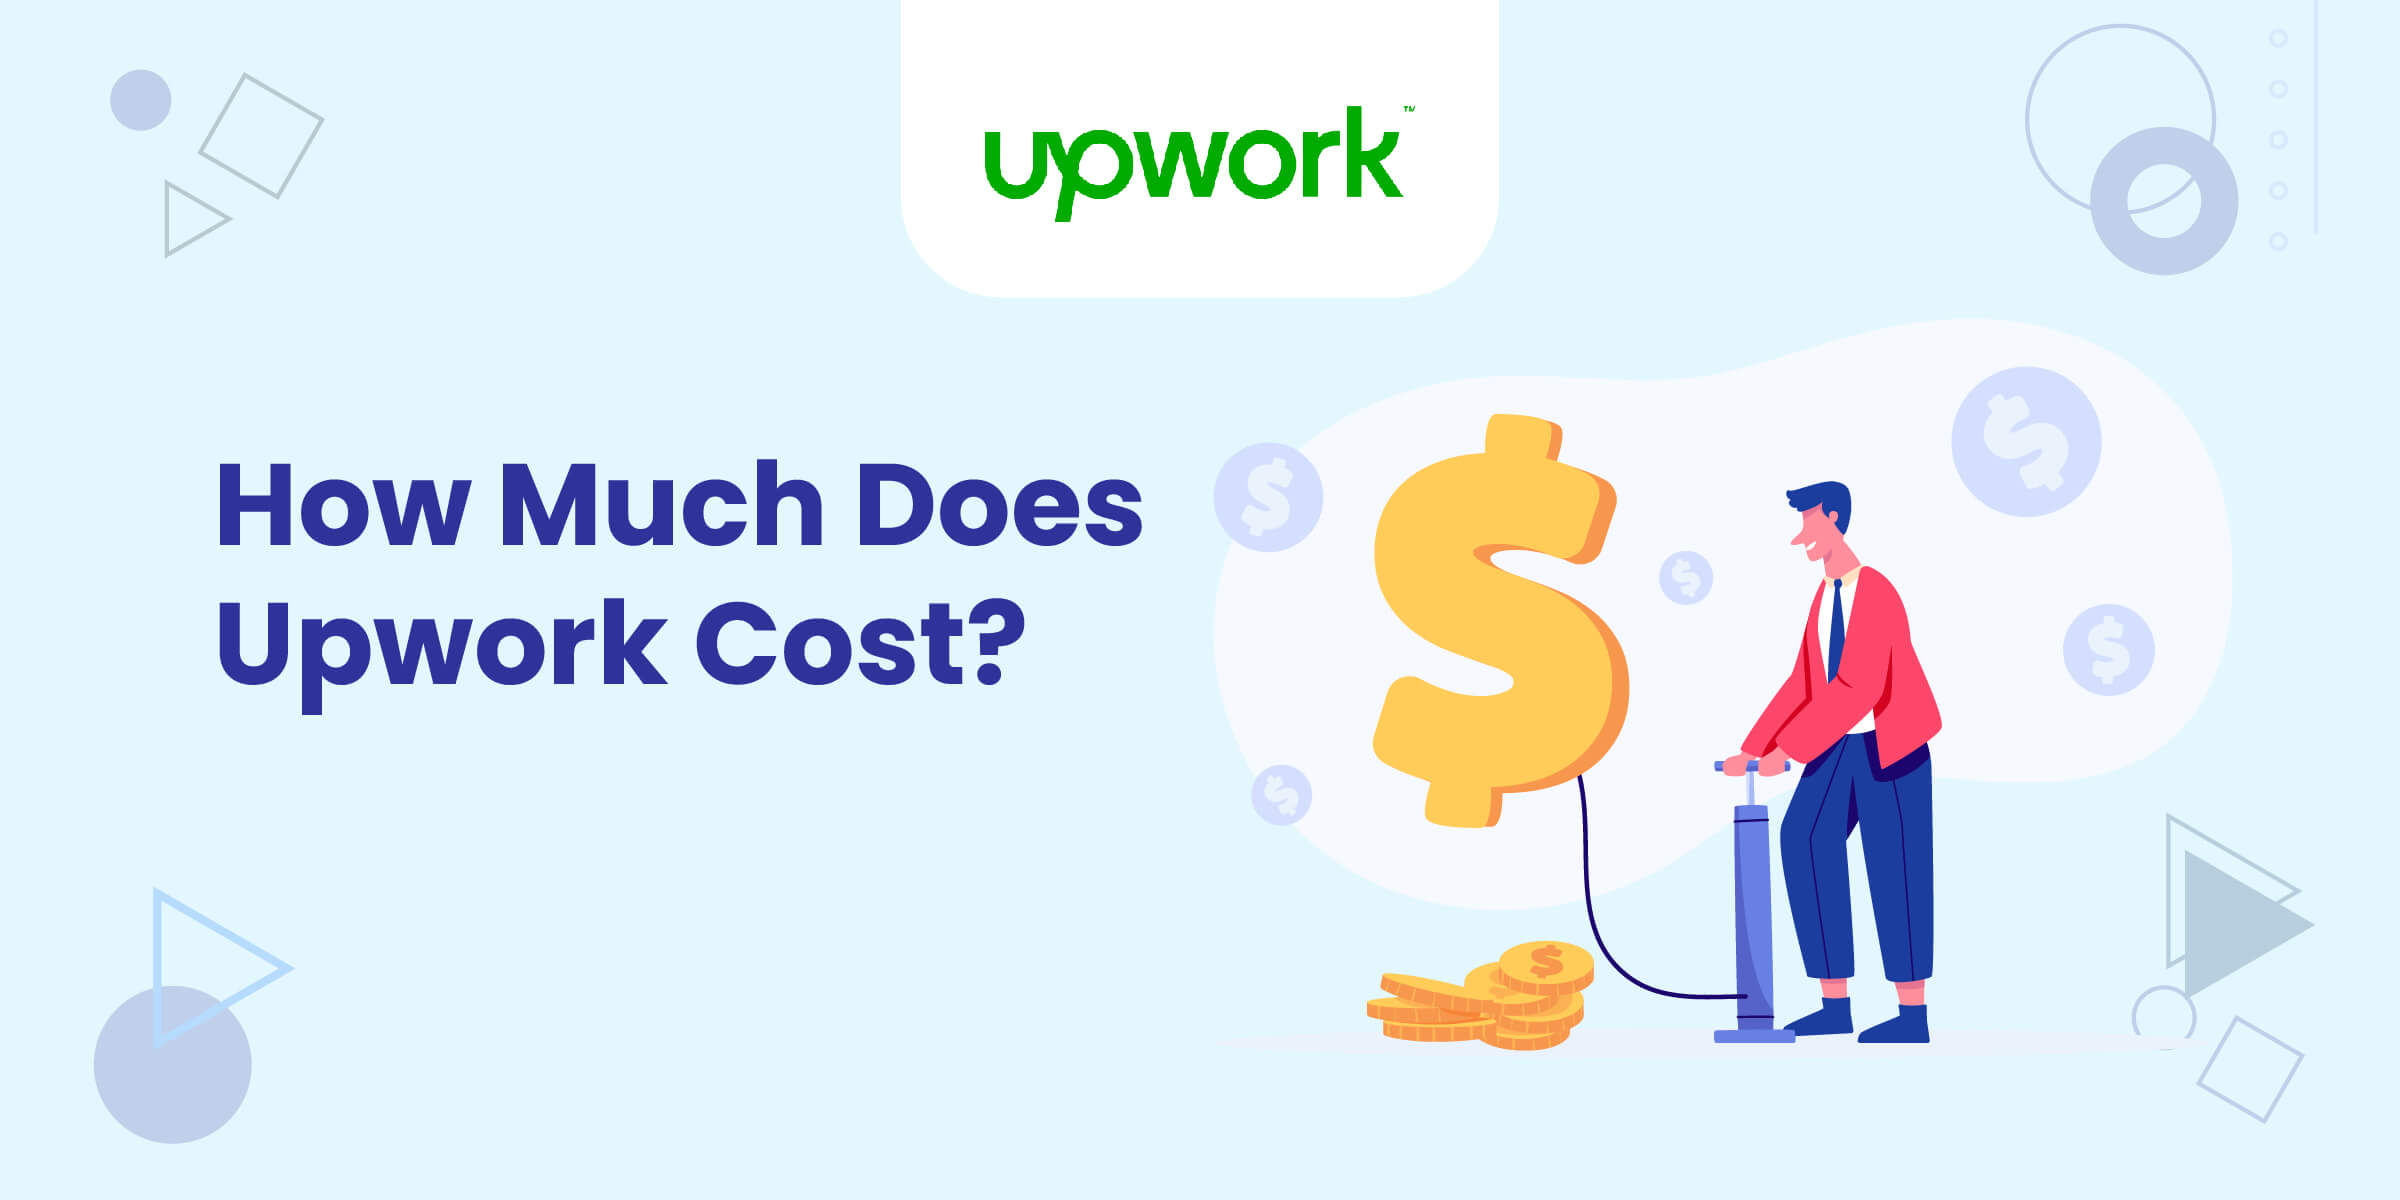 How Much Does Upwork Cost